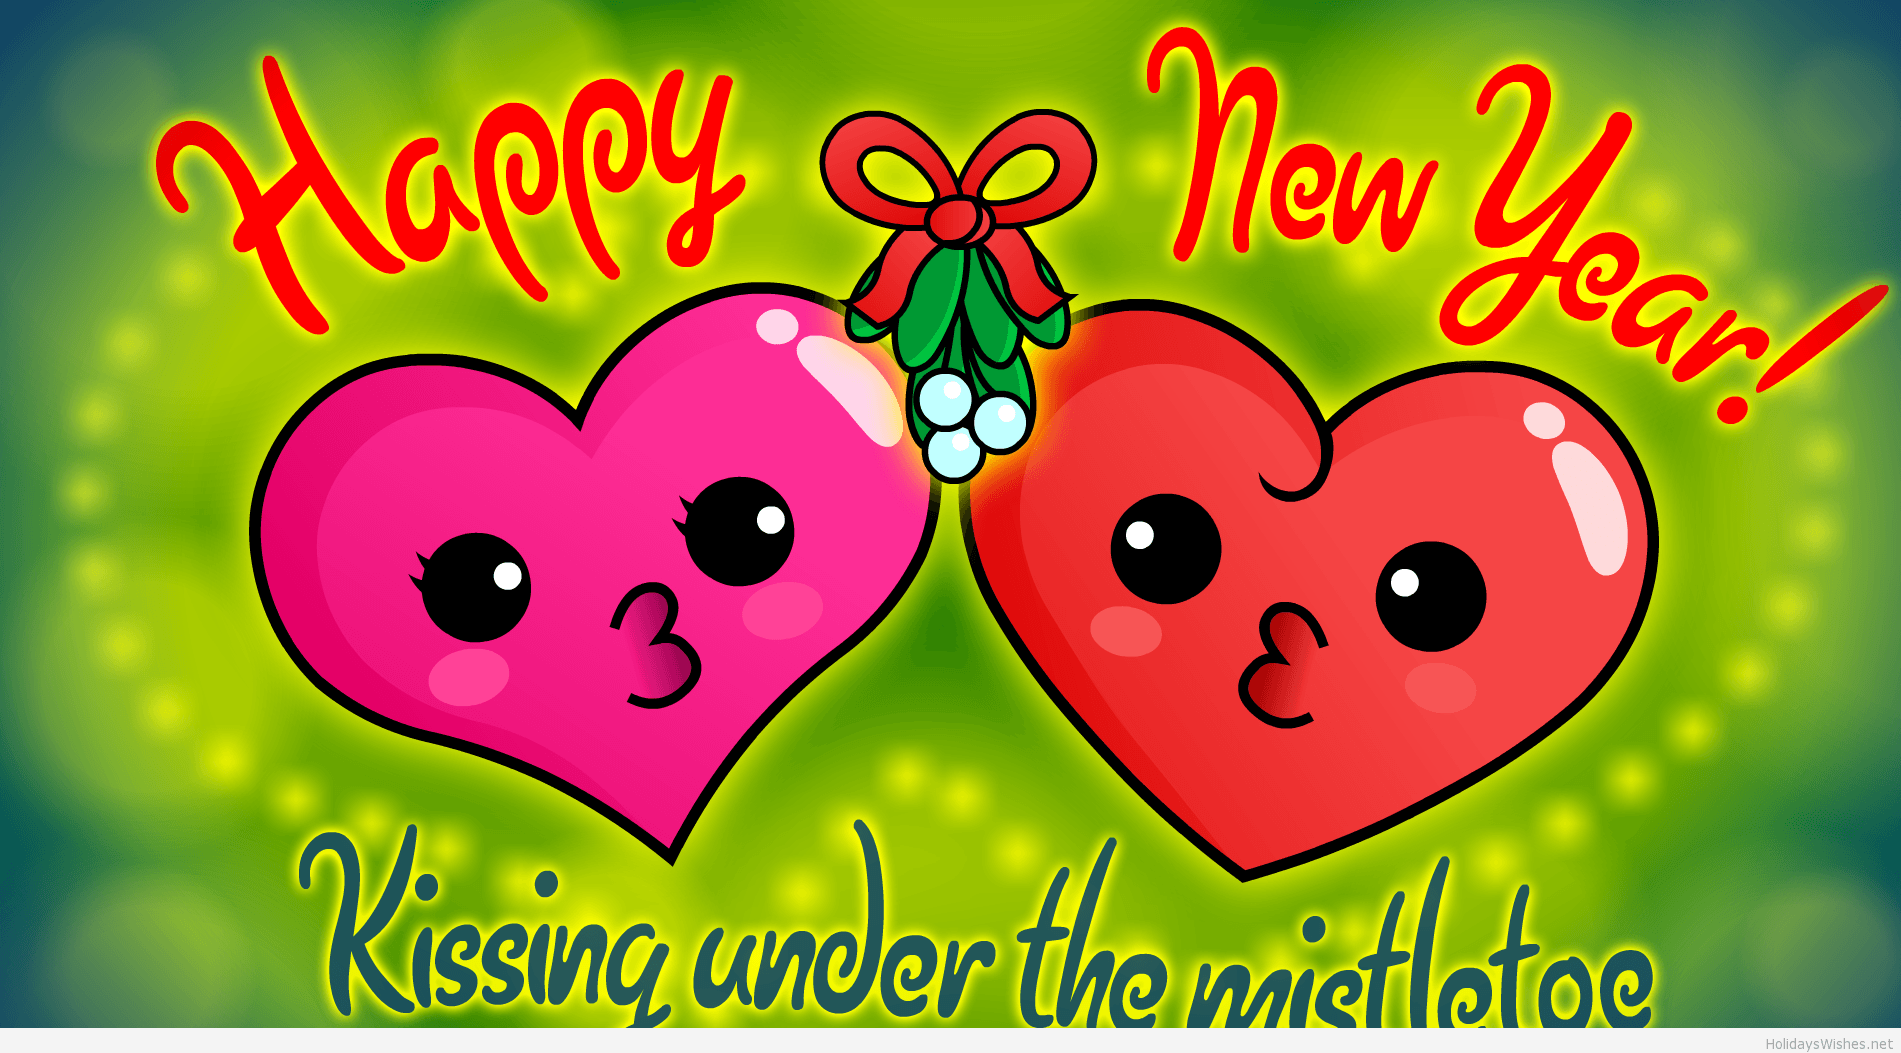 Happy new year wallpaper 2015 kiss and love